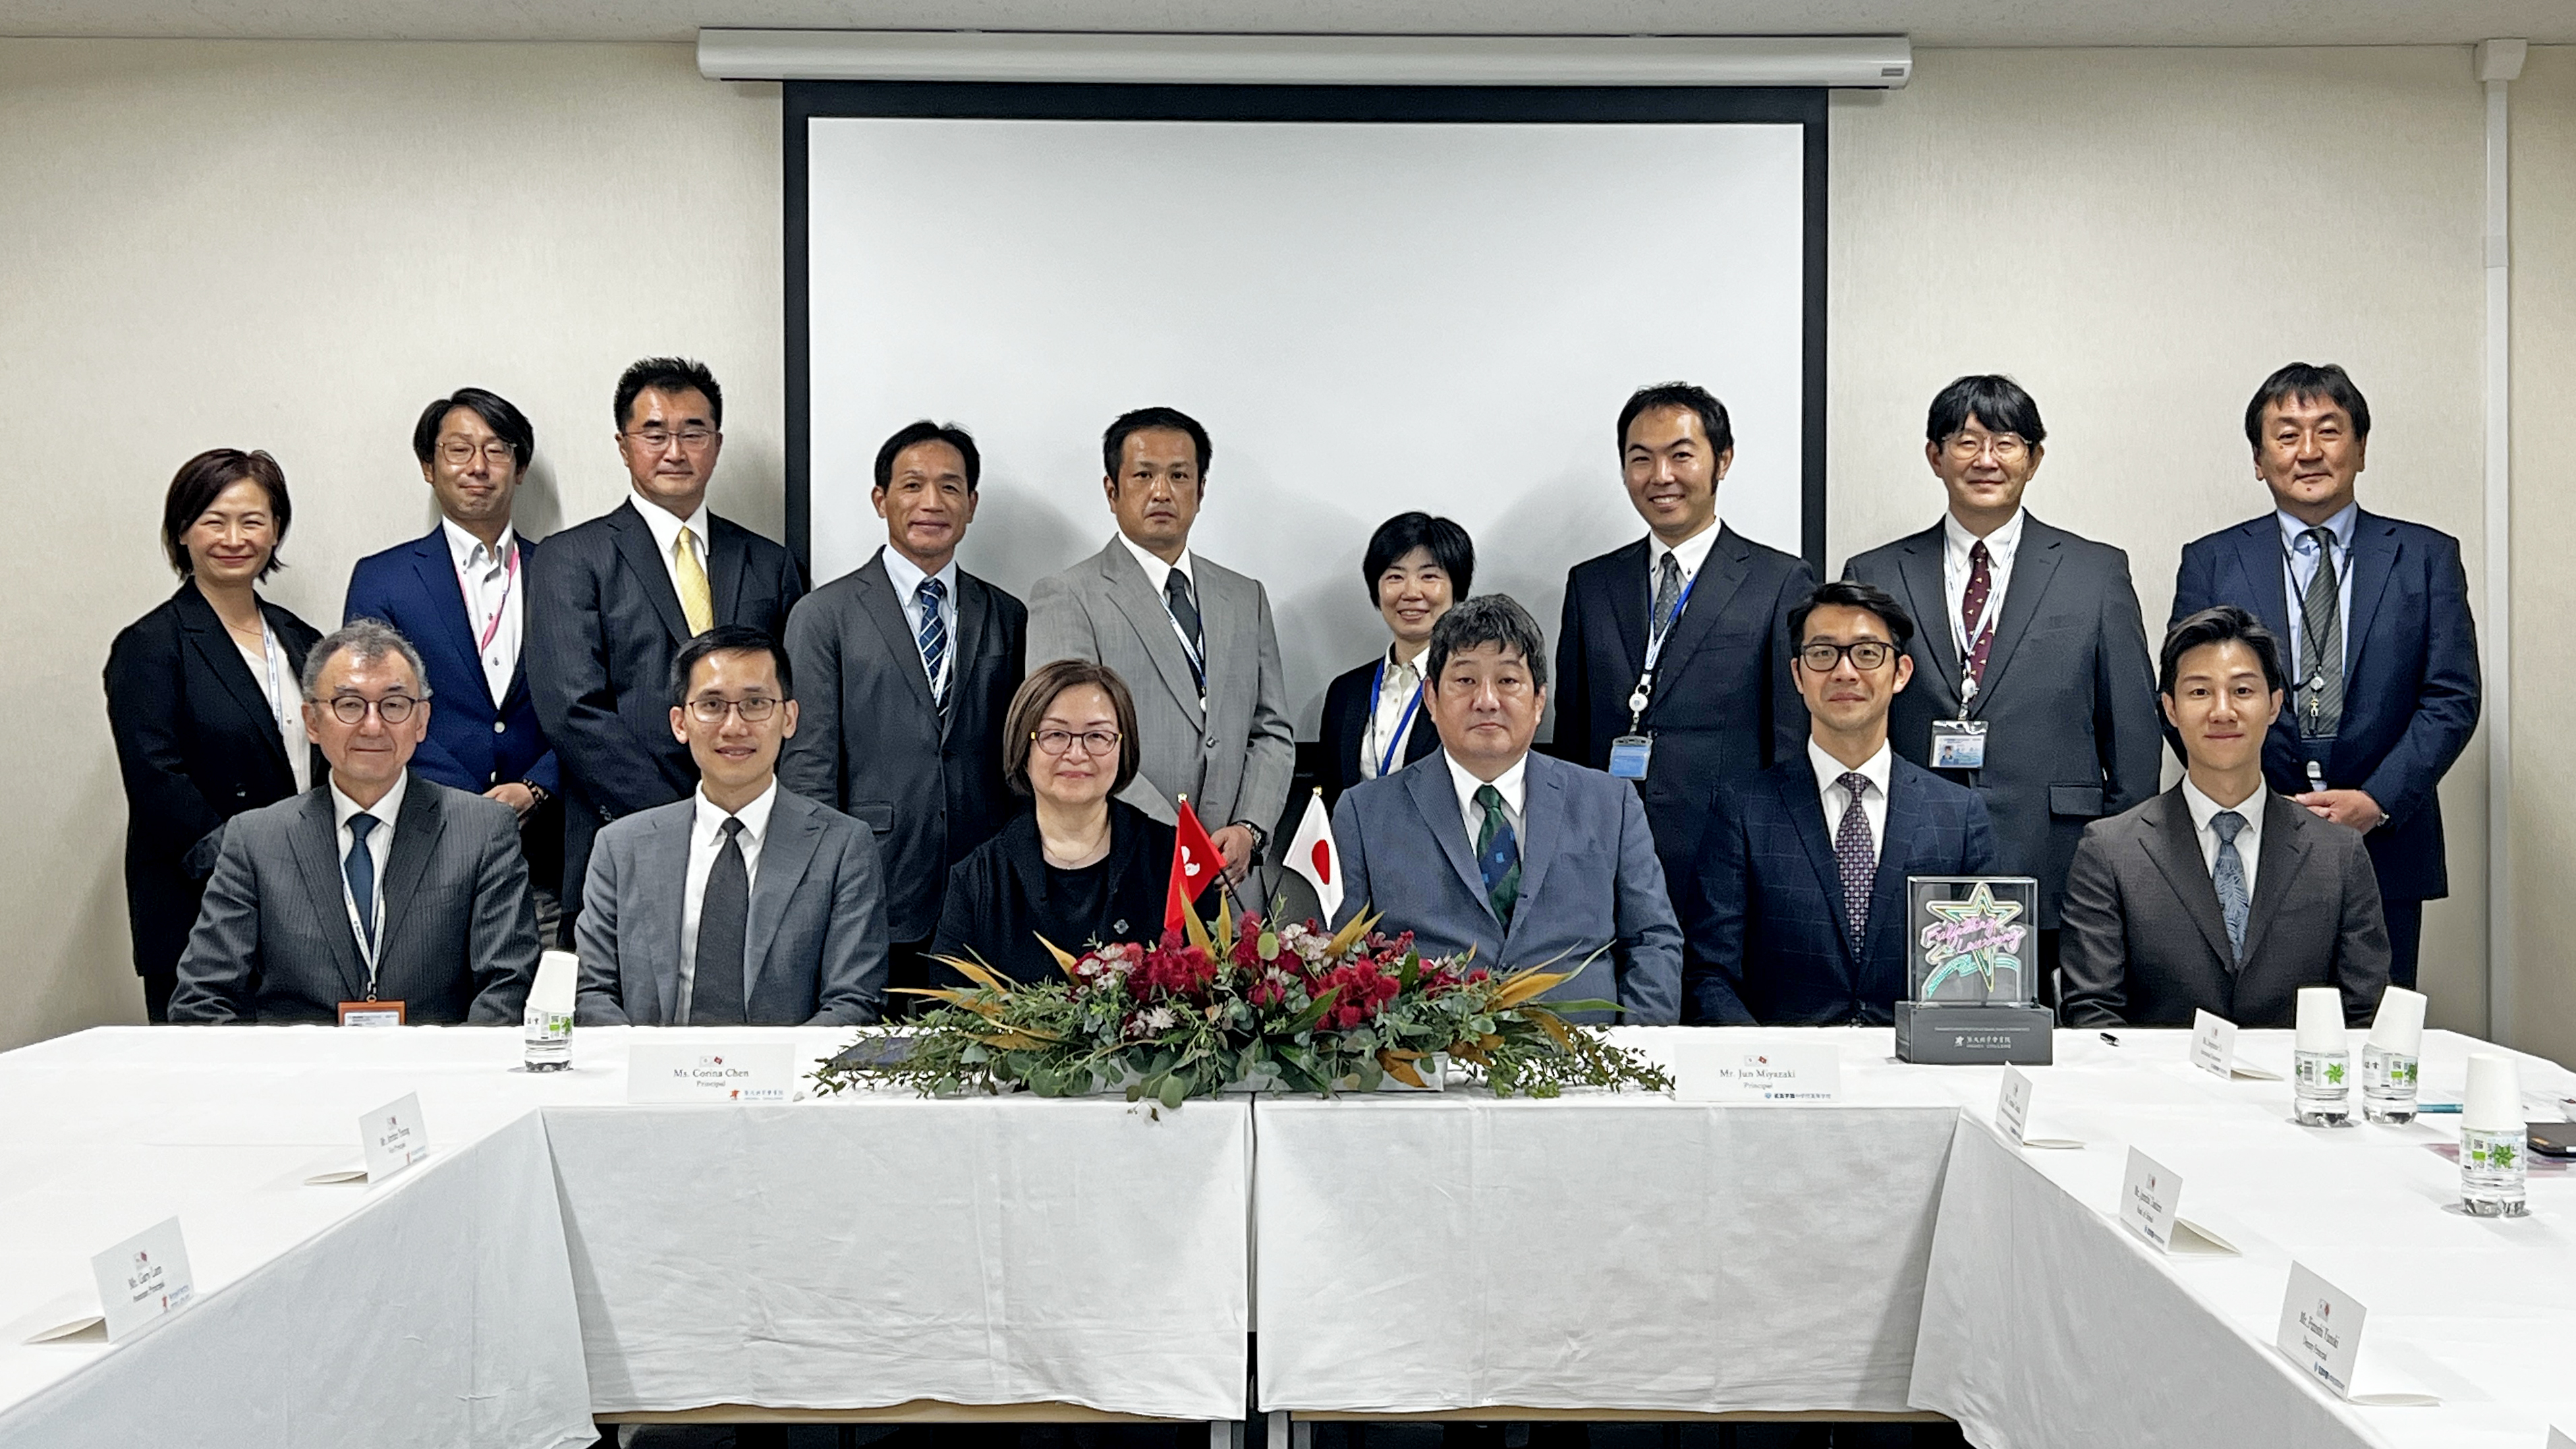 HKUGA College forms a partnership with Meikei High School